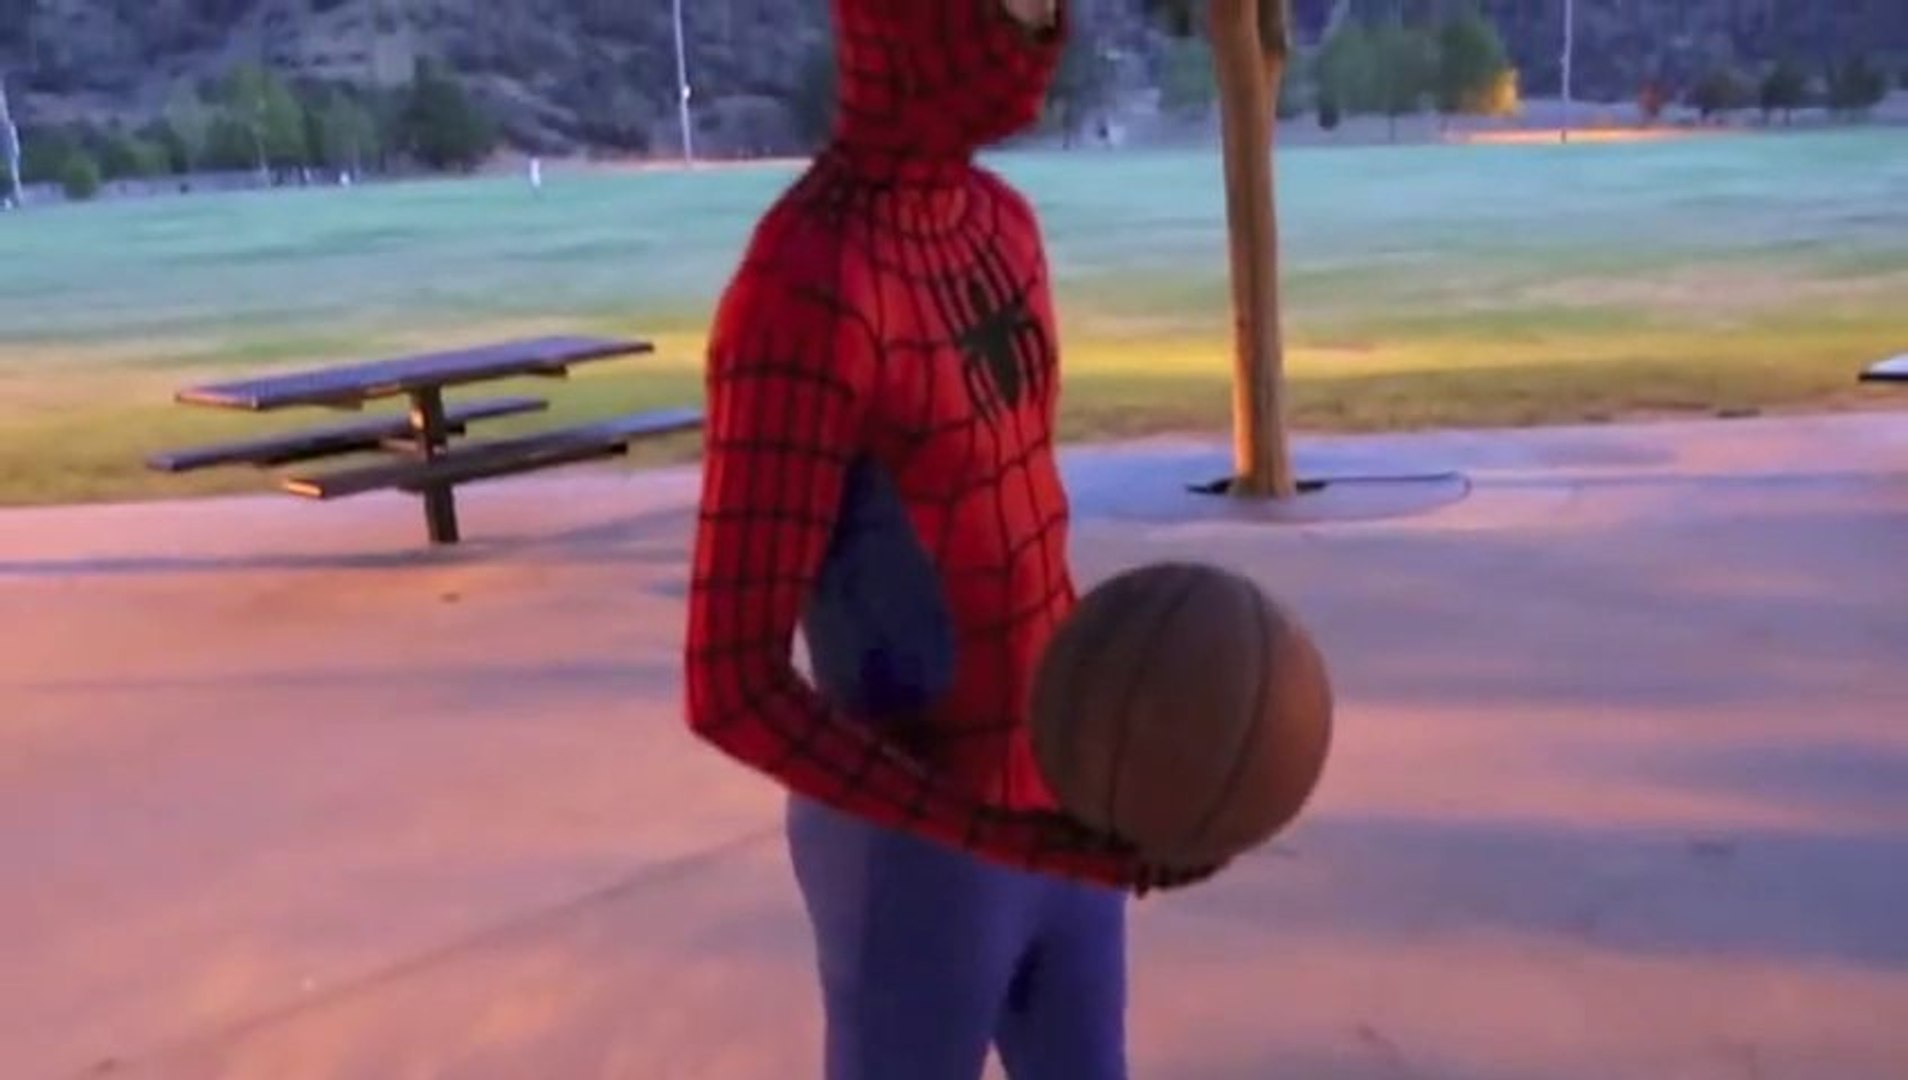 The Basketball Scene In 'The Amazing Spider-Man' Is So Hilariously Bad